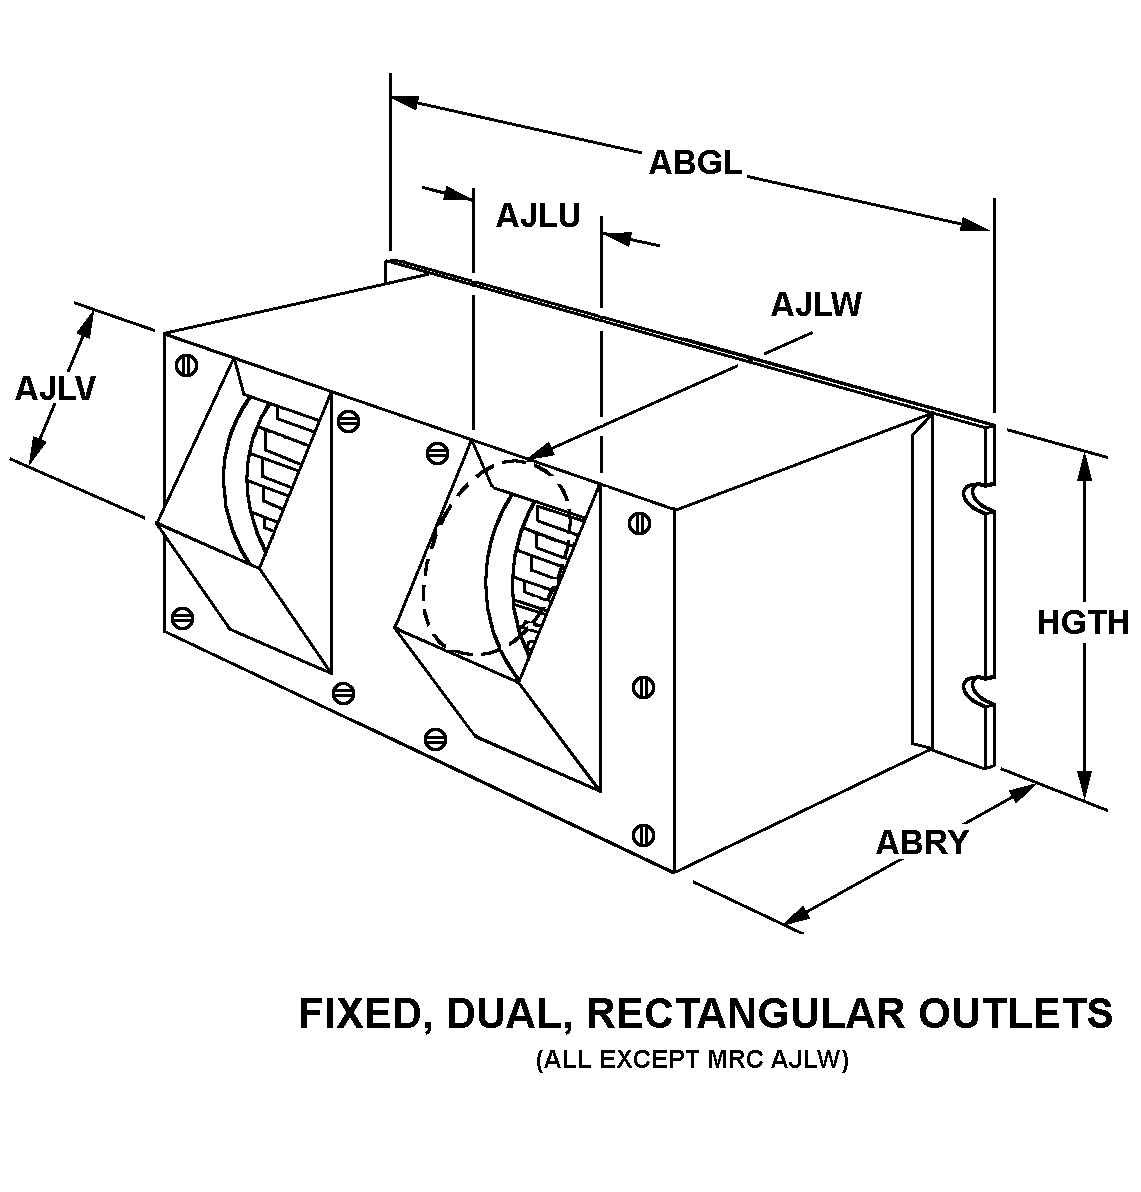 FIXED, DUAL, RECTANGULAR OUTLETS style nsn 4140-00-057-7298